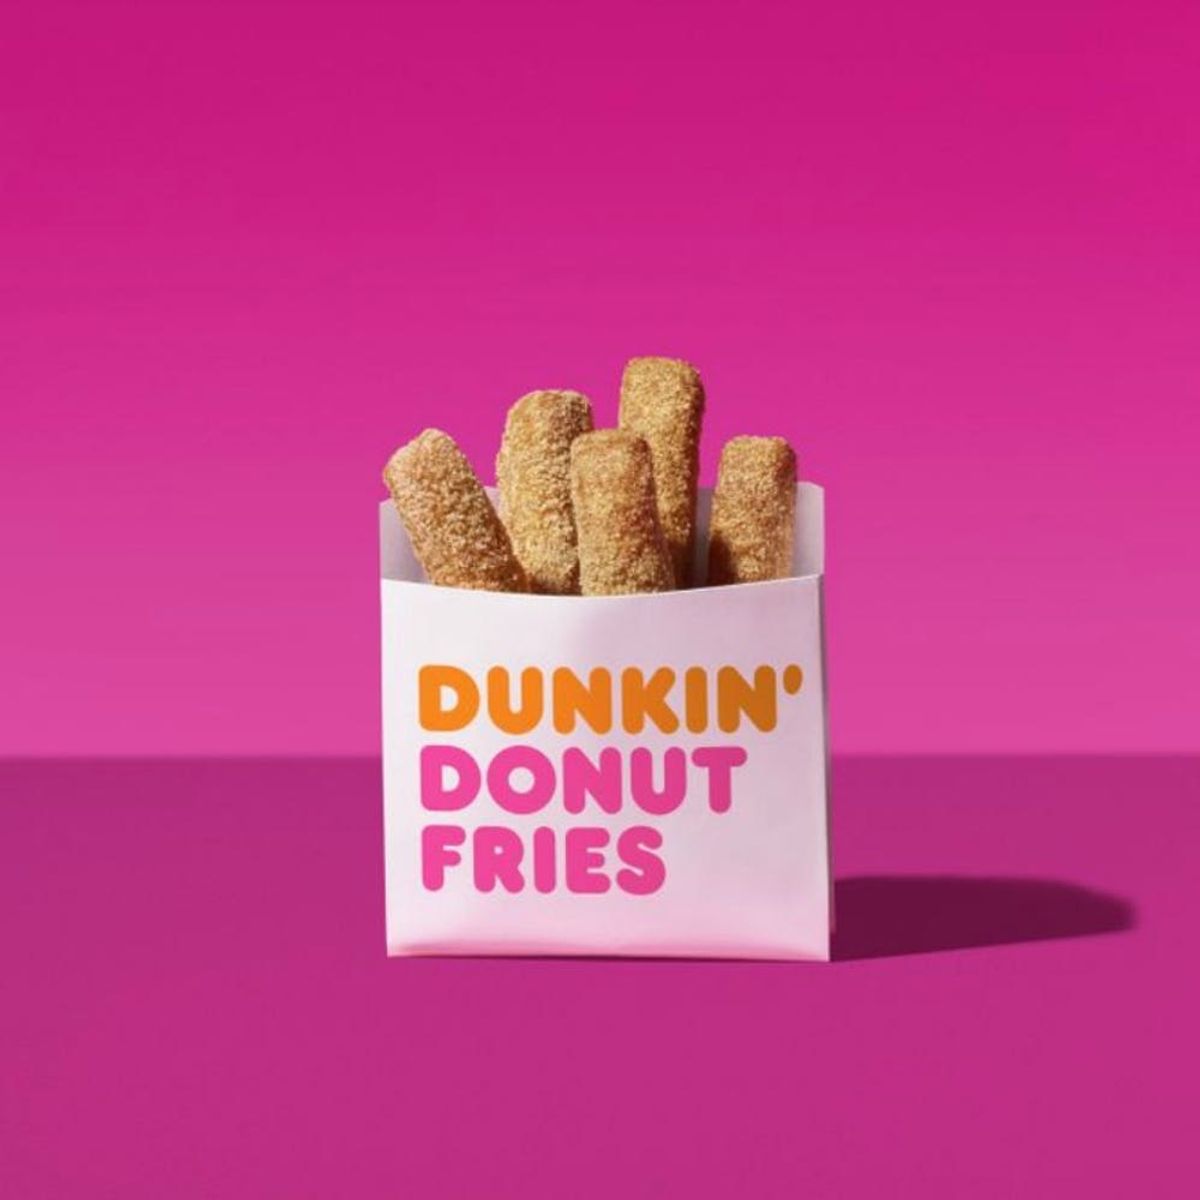 Dunkin’ Donuts Is Giving Away Free Donut Fries for National French Fry Day